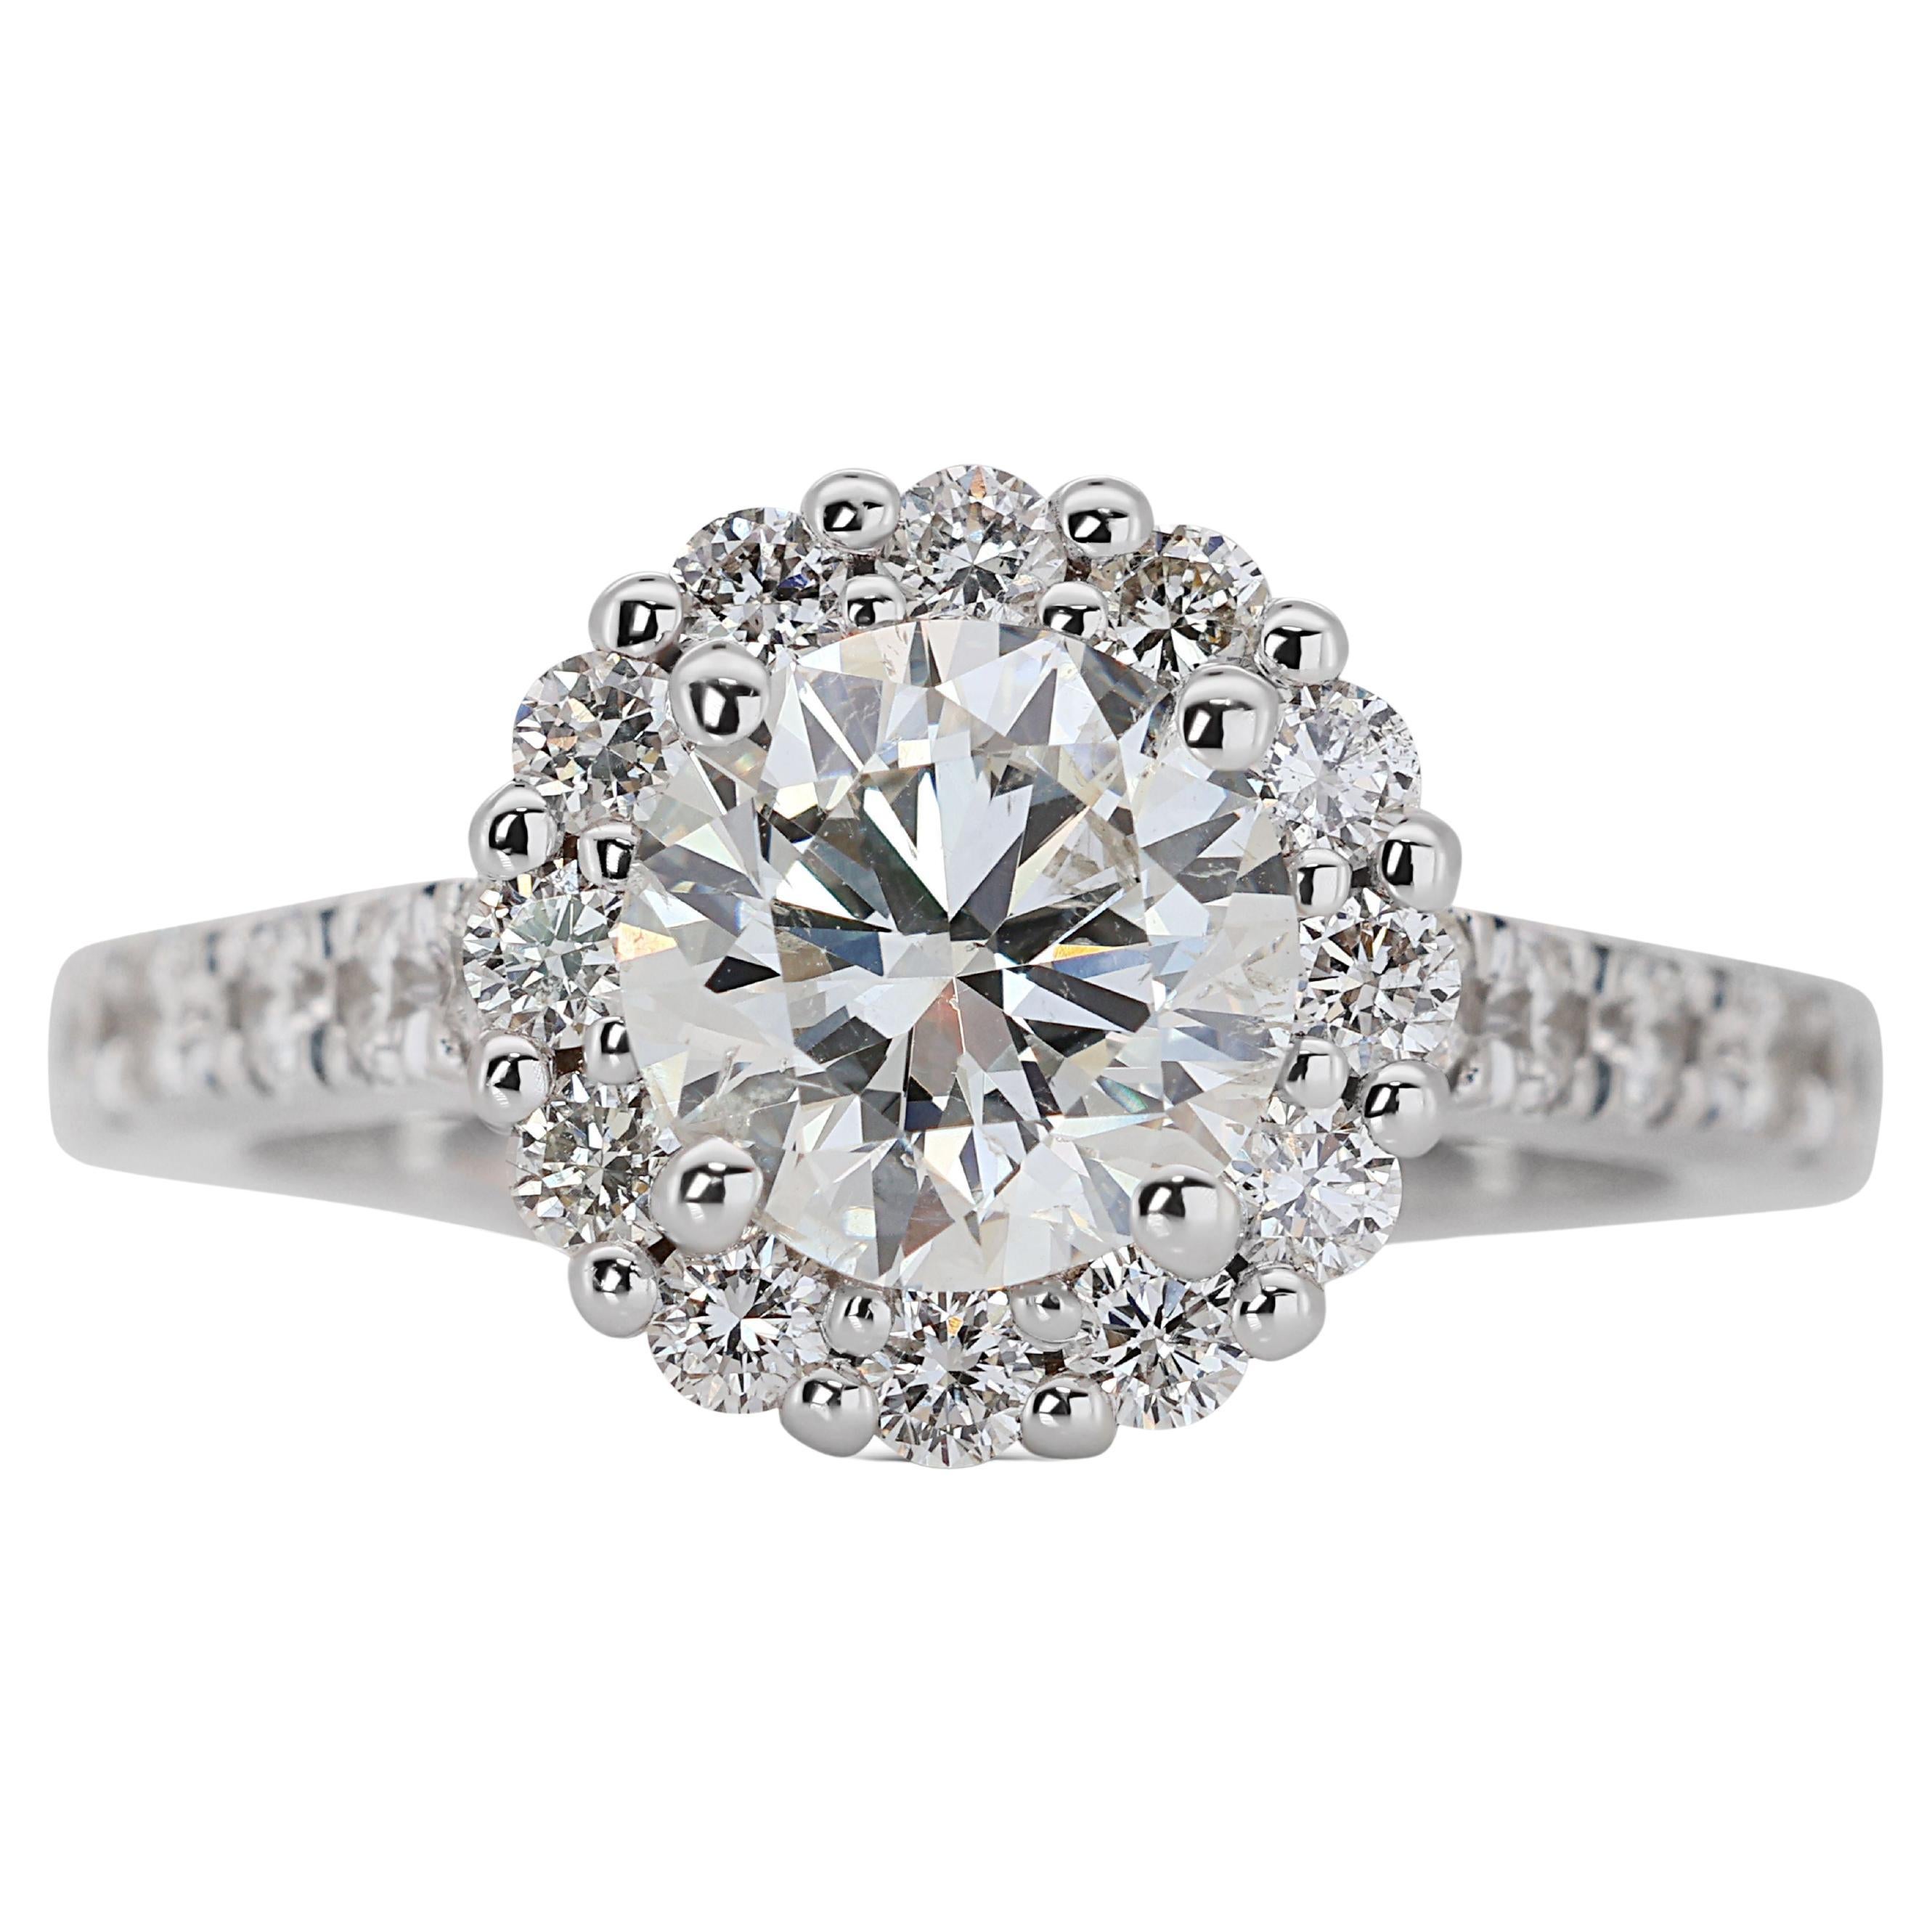 Sophisticated 14k White Gold Halo Ring w/ 1.43 Carat Natural Diamonds